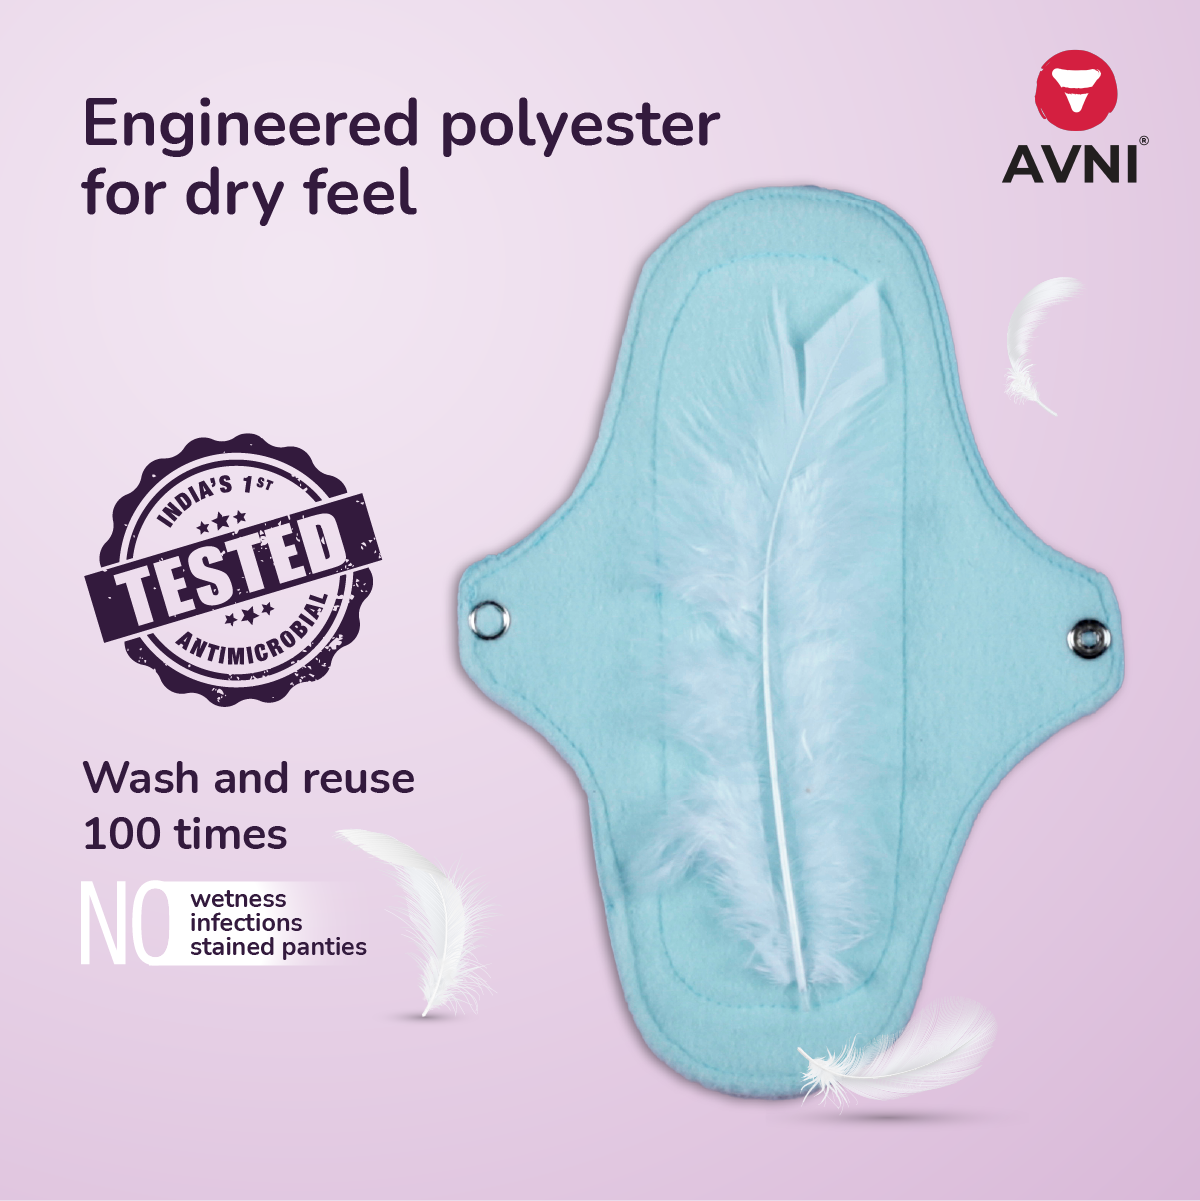 Avni Fluff Panty Liner + Stain removing liquid detergent Saver Combo -  Antimicrobial Dry Feel Reusable Panty Liner + Natural wash